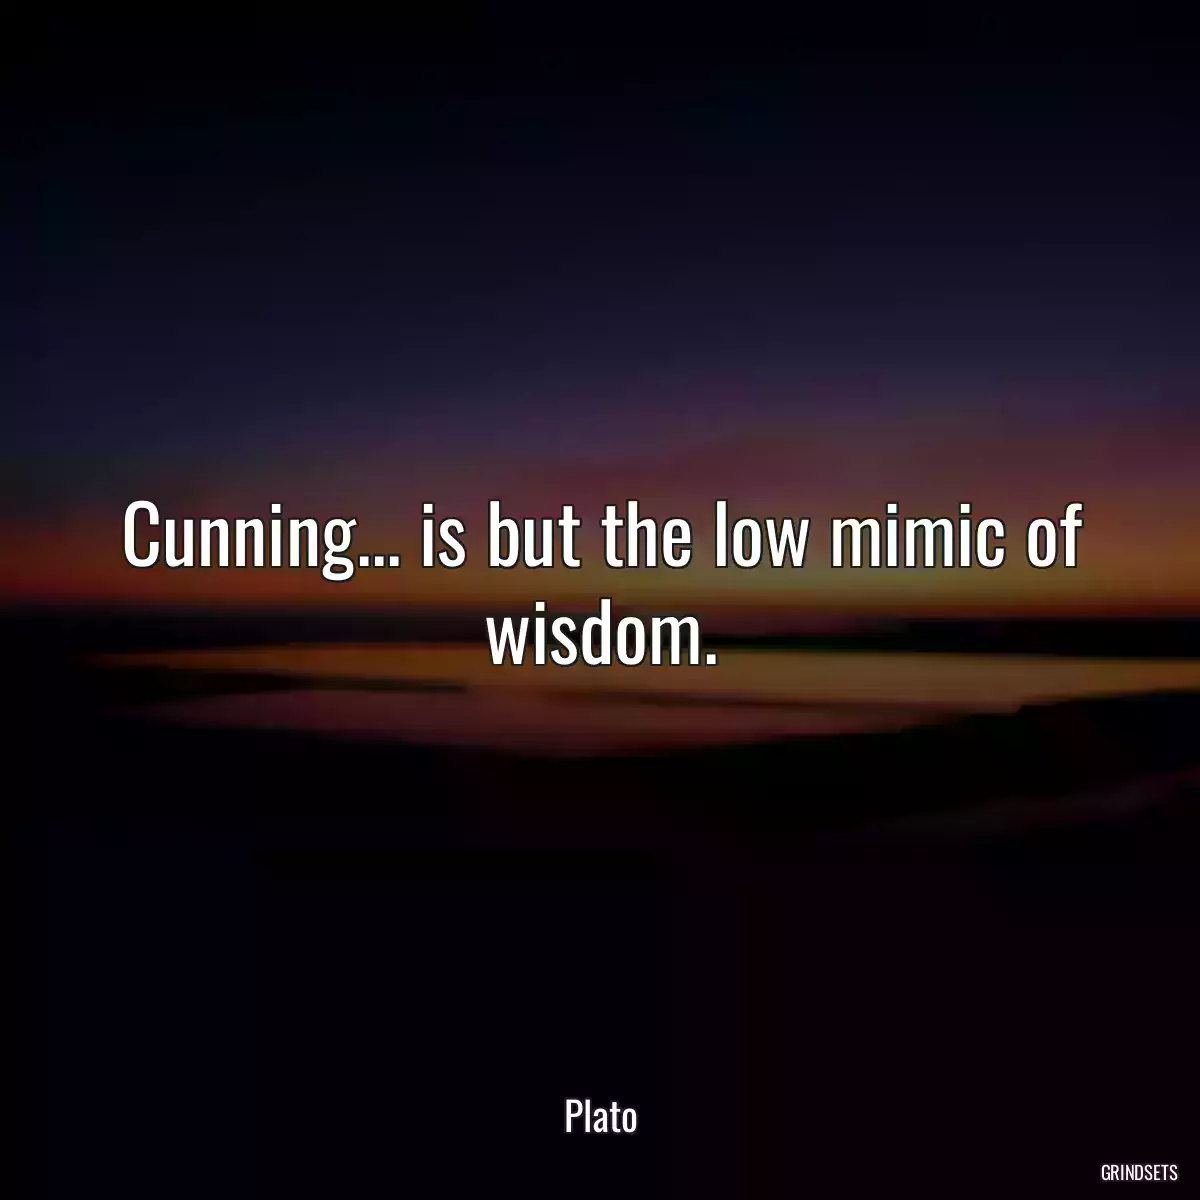 Cunning... is but the low mimic of wisdom.